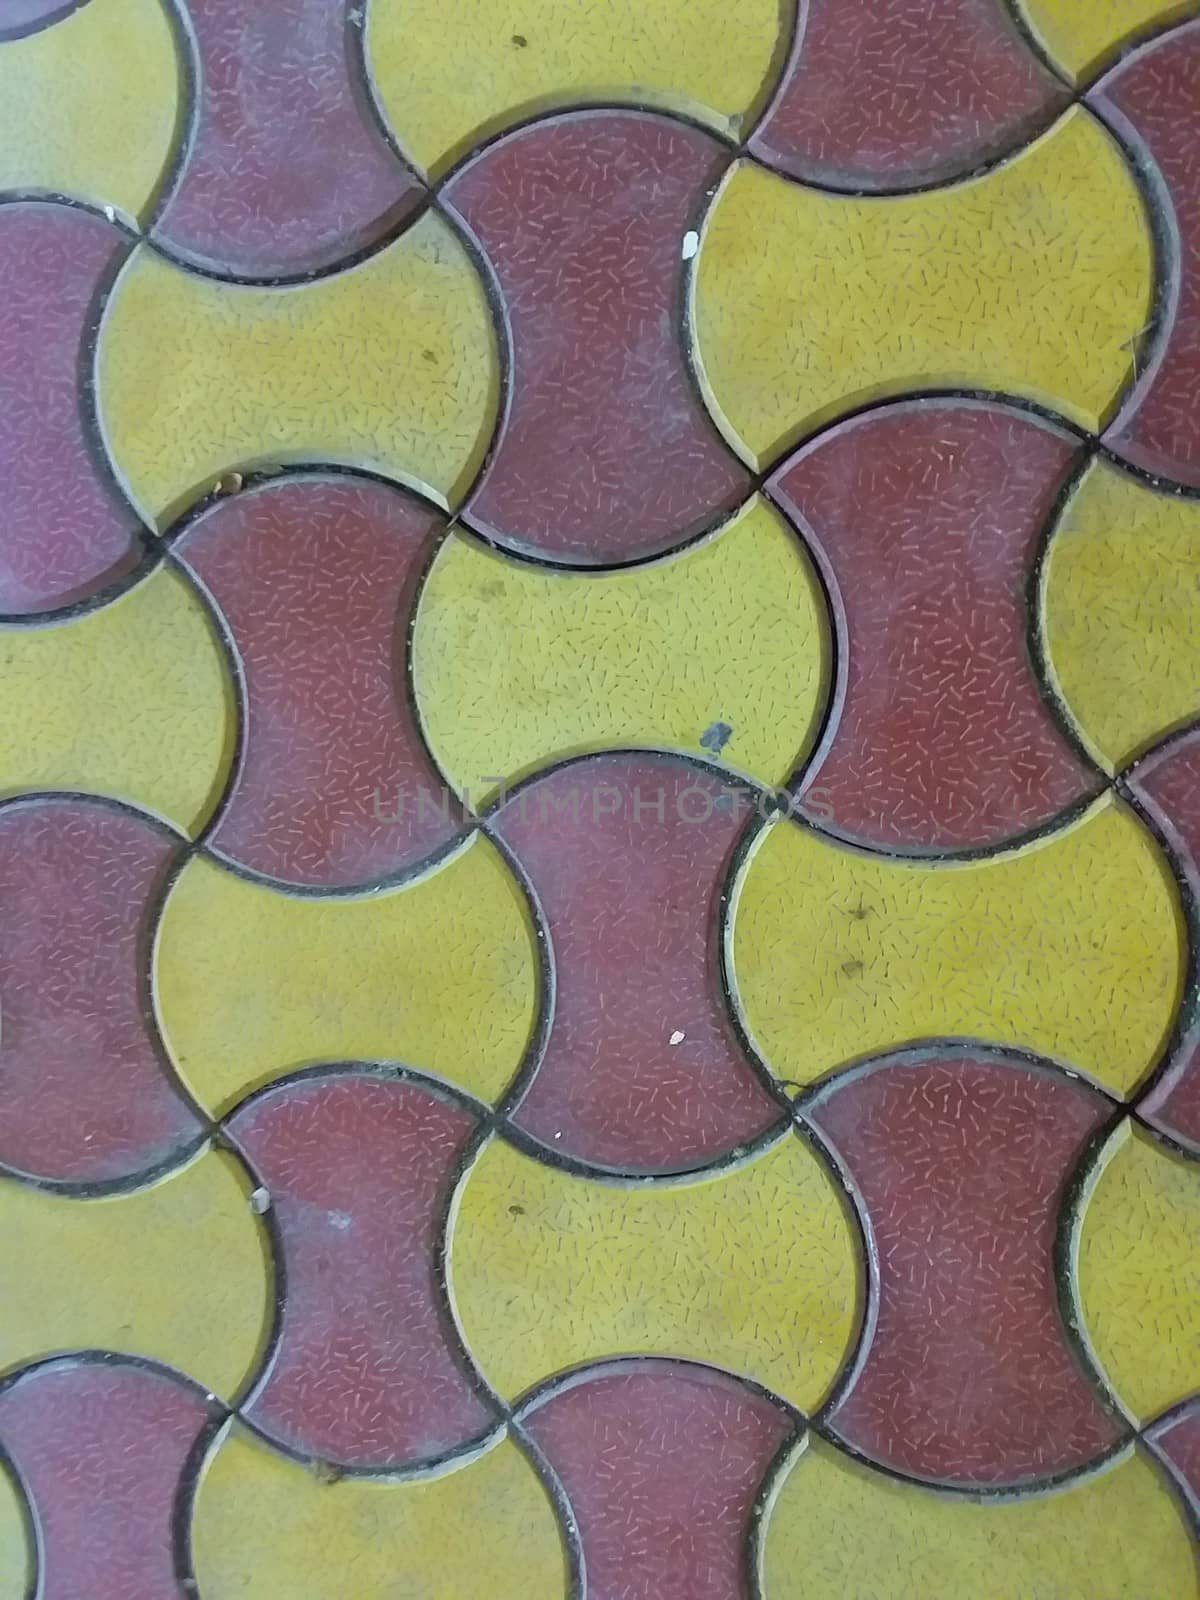 red and yellow ceramic design on tiles by gswagh71